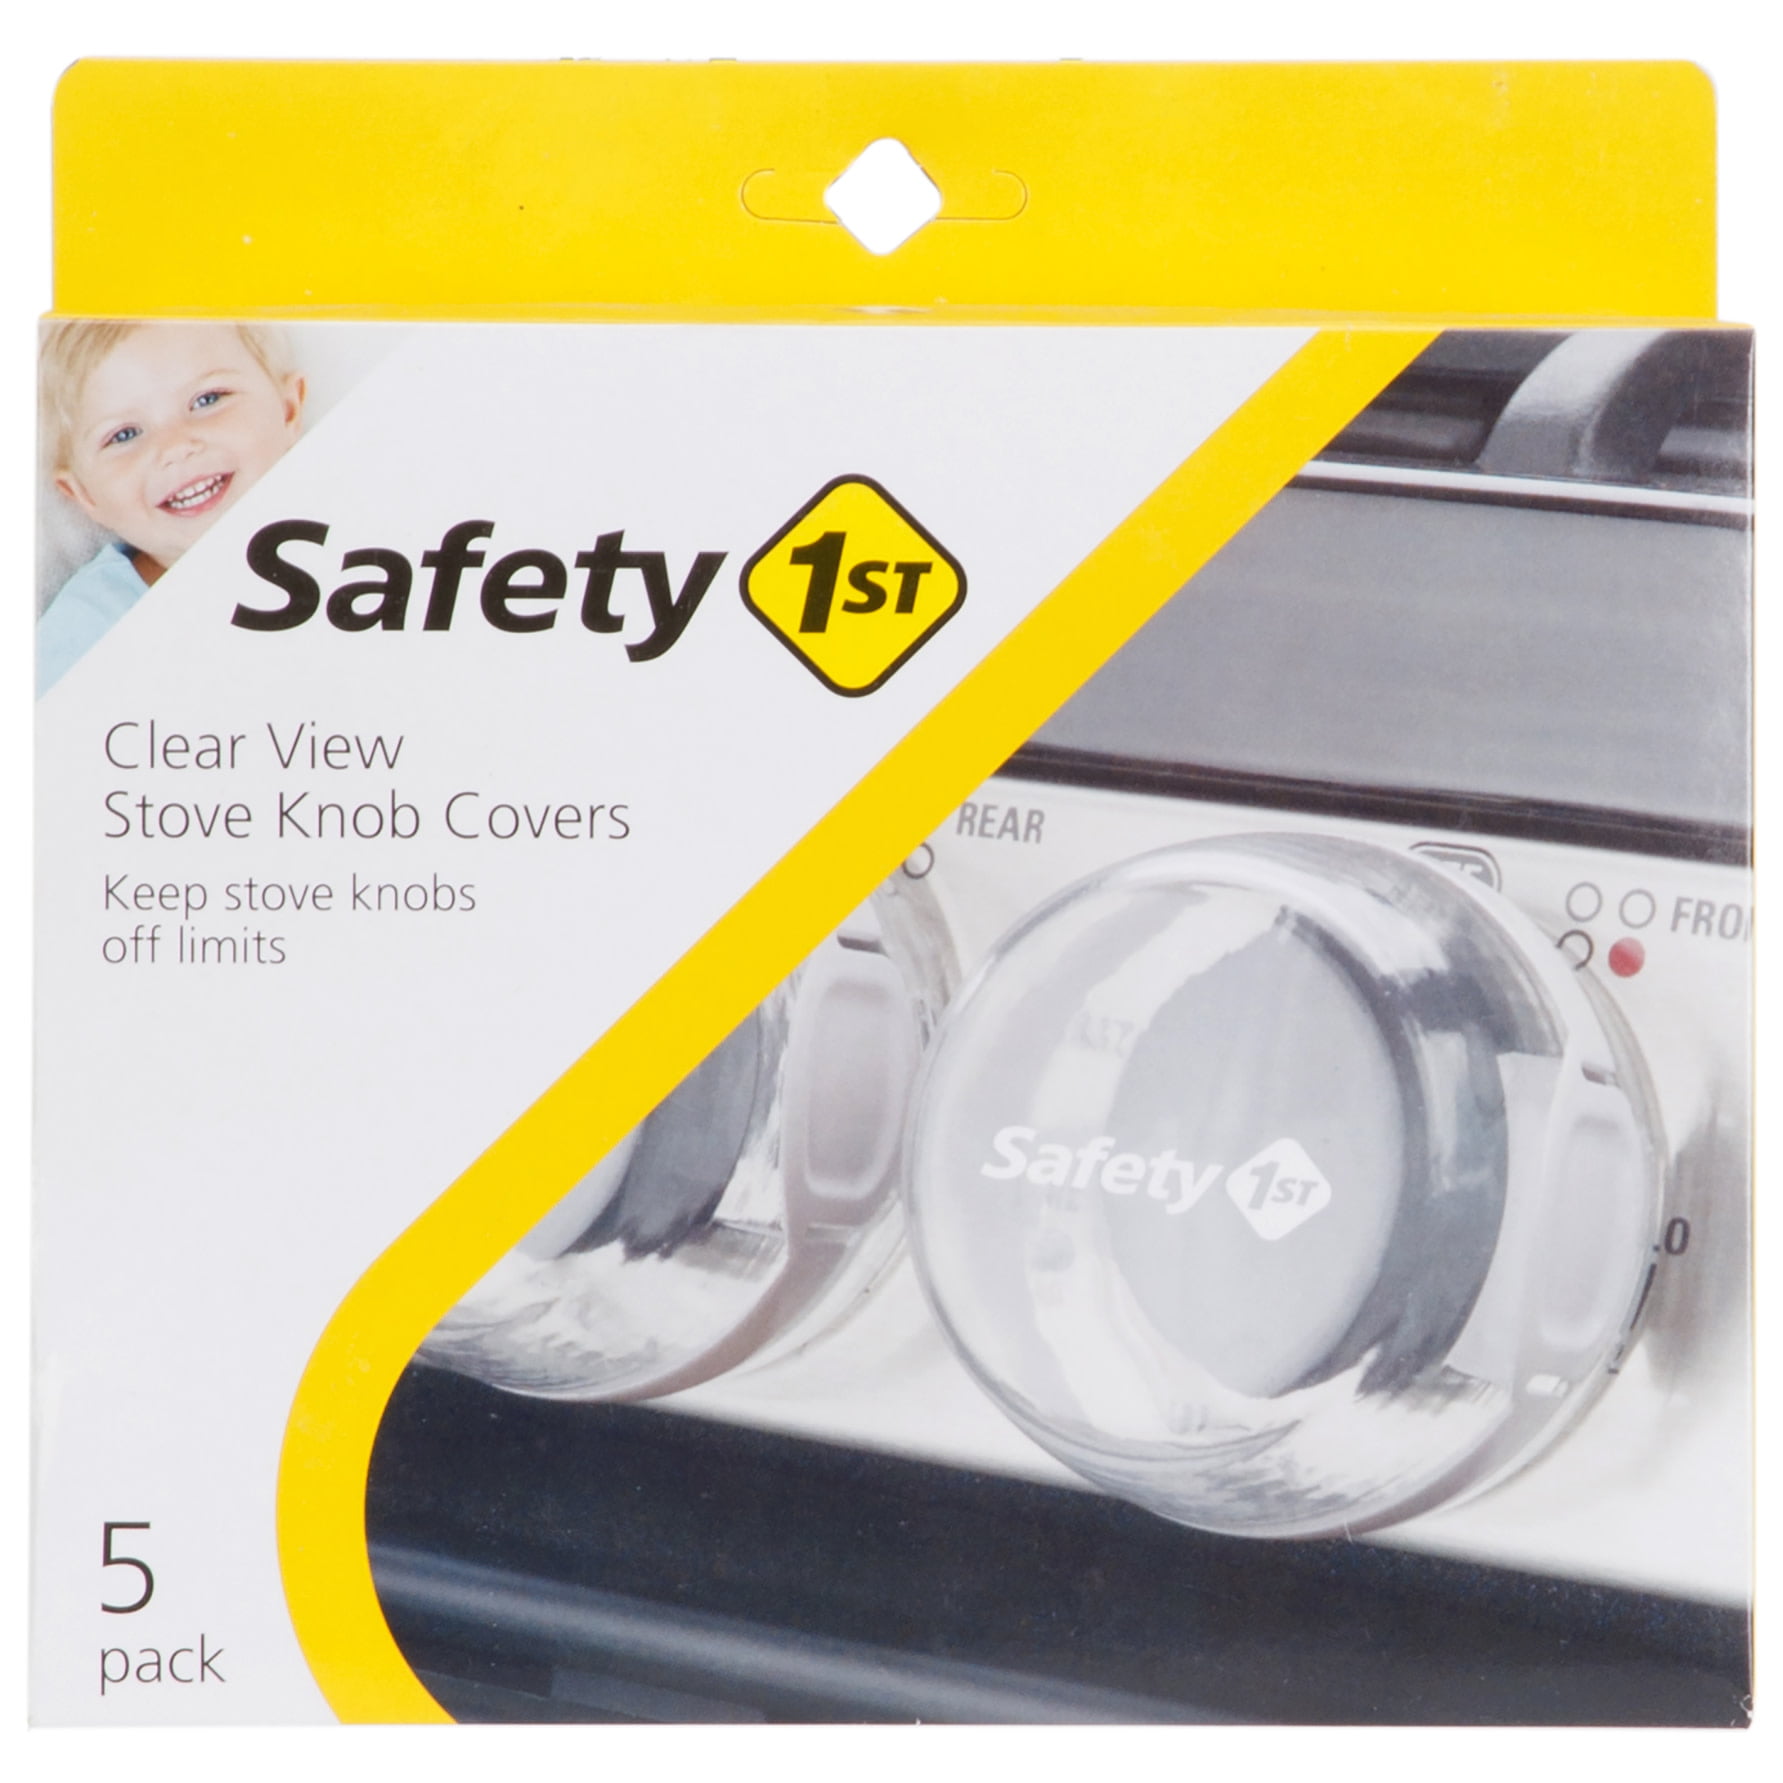 Stove Knob Burner Covers Child Proof Guard Safety First Stove Oven Knob Covers for Child Safety Transparent Gas Oven Stove Knob Childproof Safety Covers 6 Pack Stove Baby Proof Knobs 